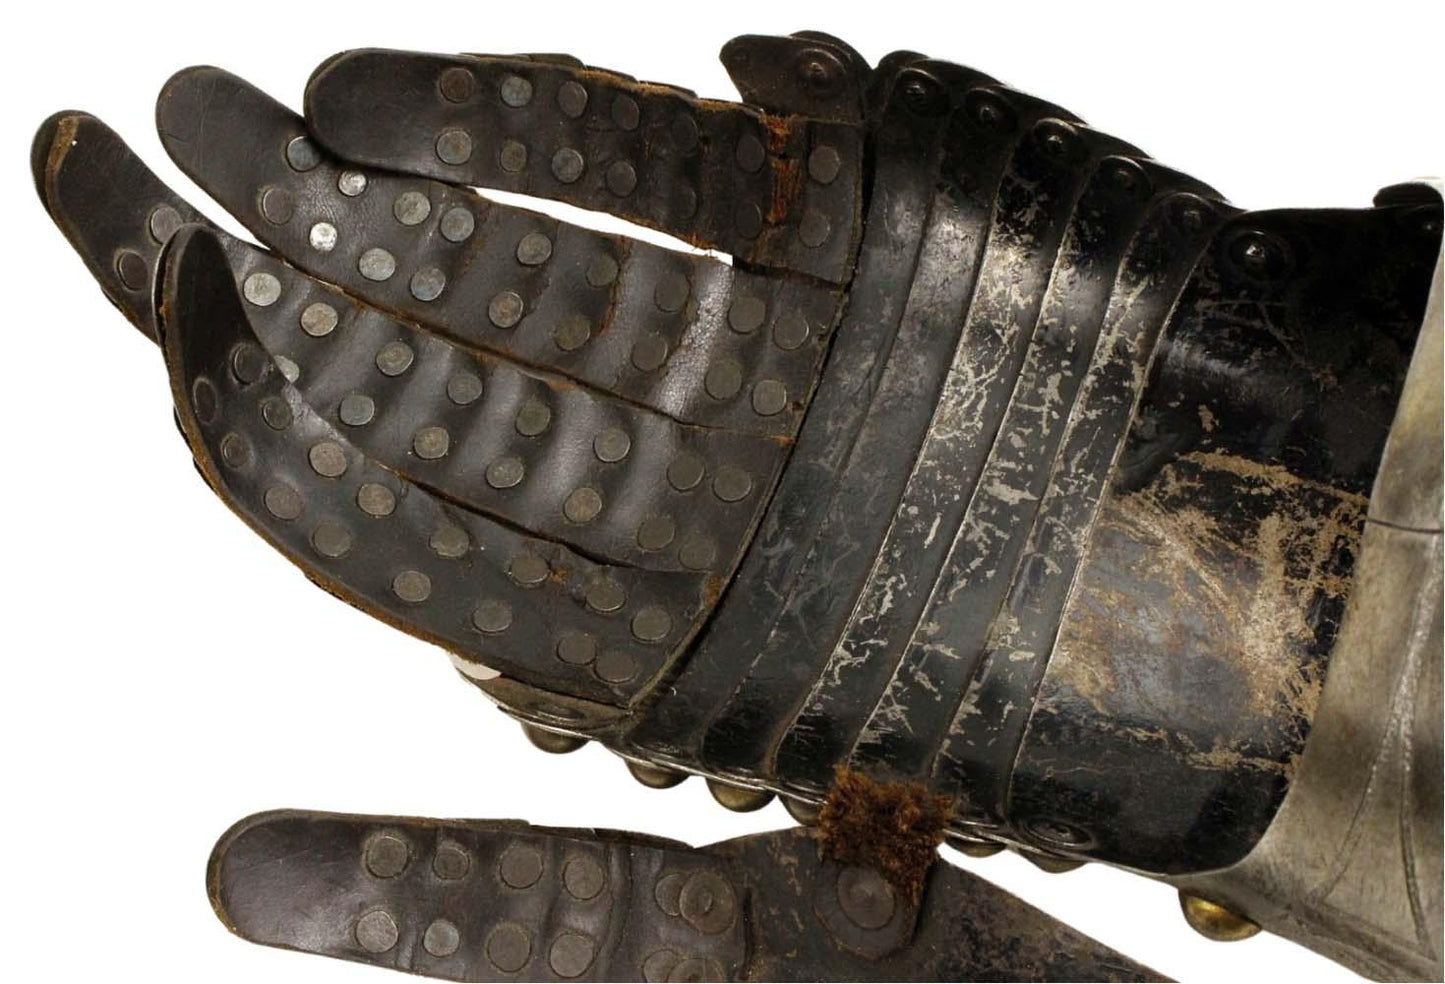 Very Attractive Victorian Pair Of 16th-17th C. Style Knight's Armor Gauntlets With Etched Decorations. Complete With Original Leather Strapping Fully Intact